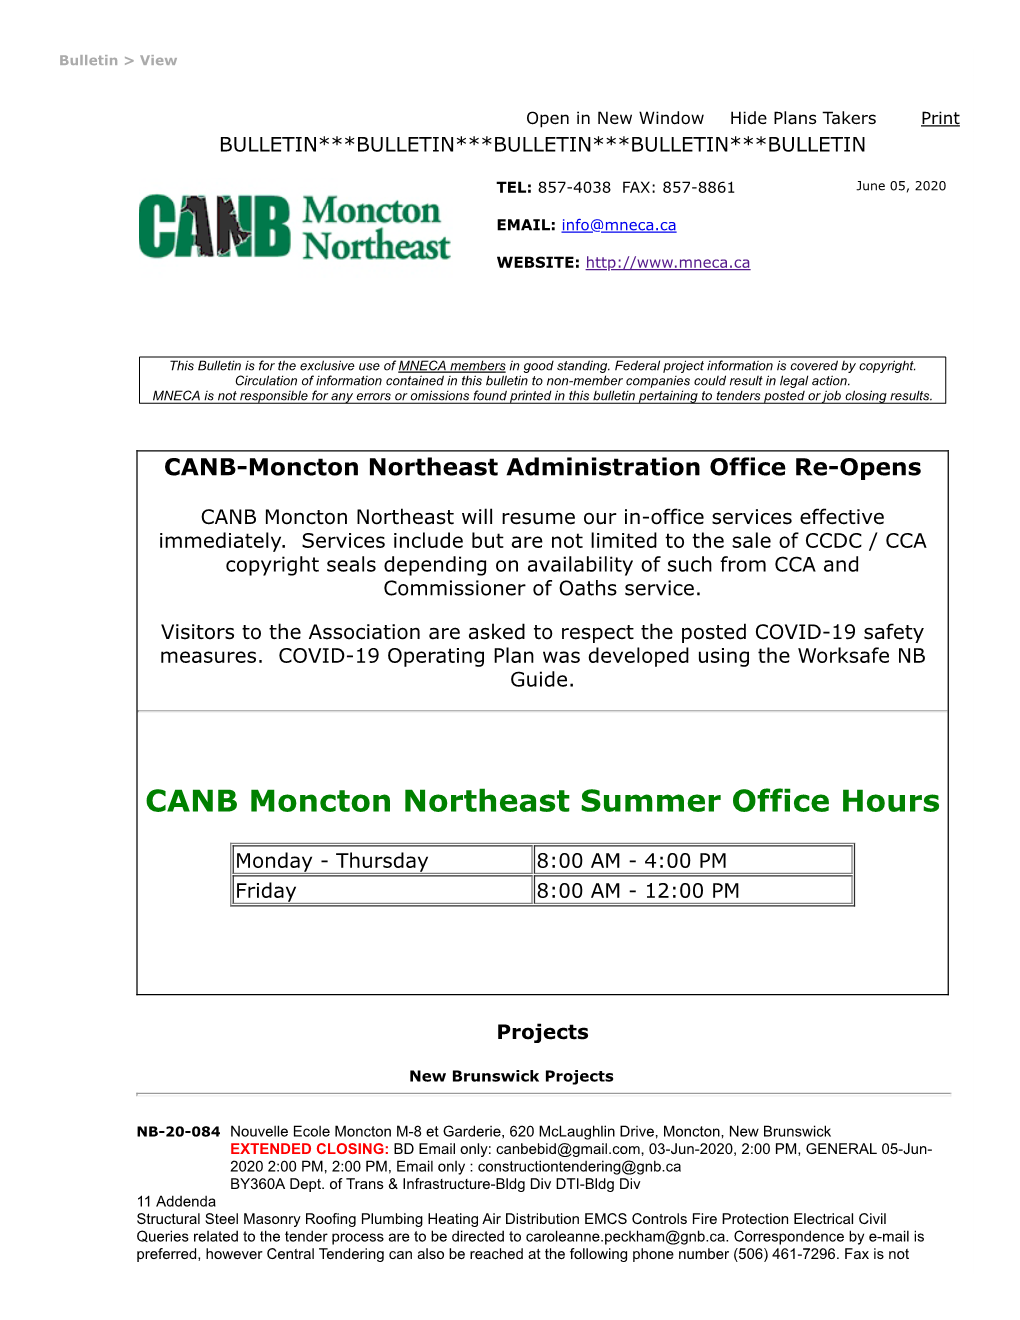 CANB Moncton Northeast Summer Office Hours